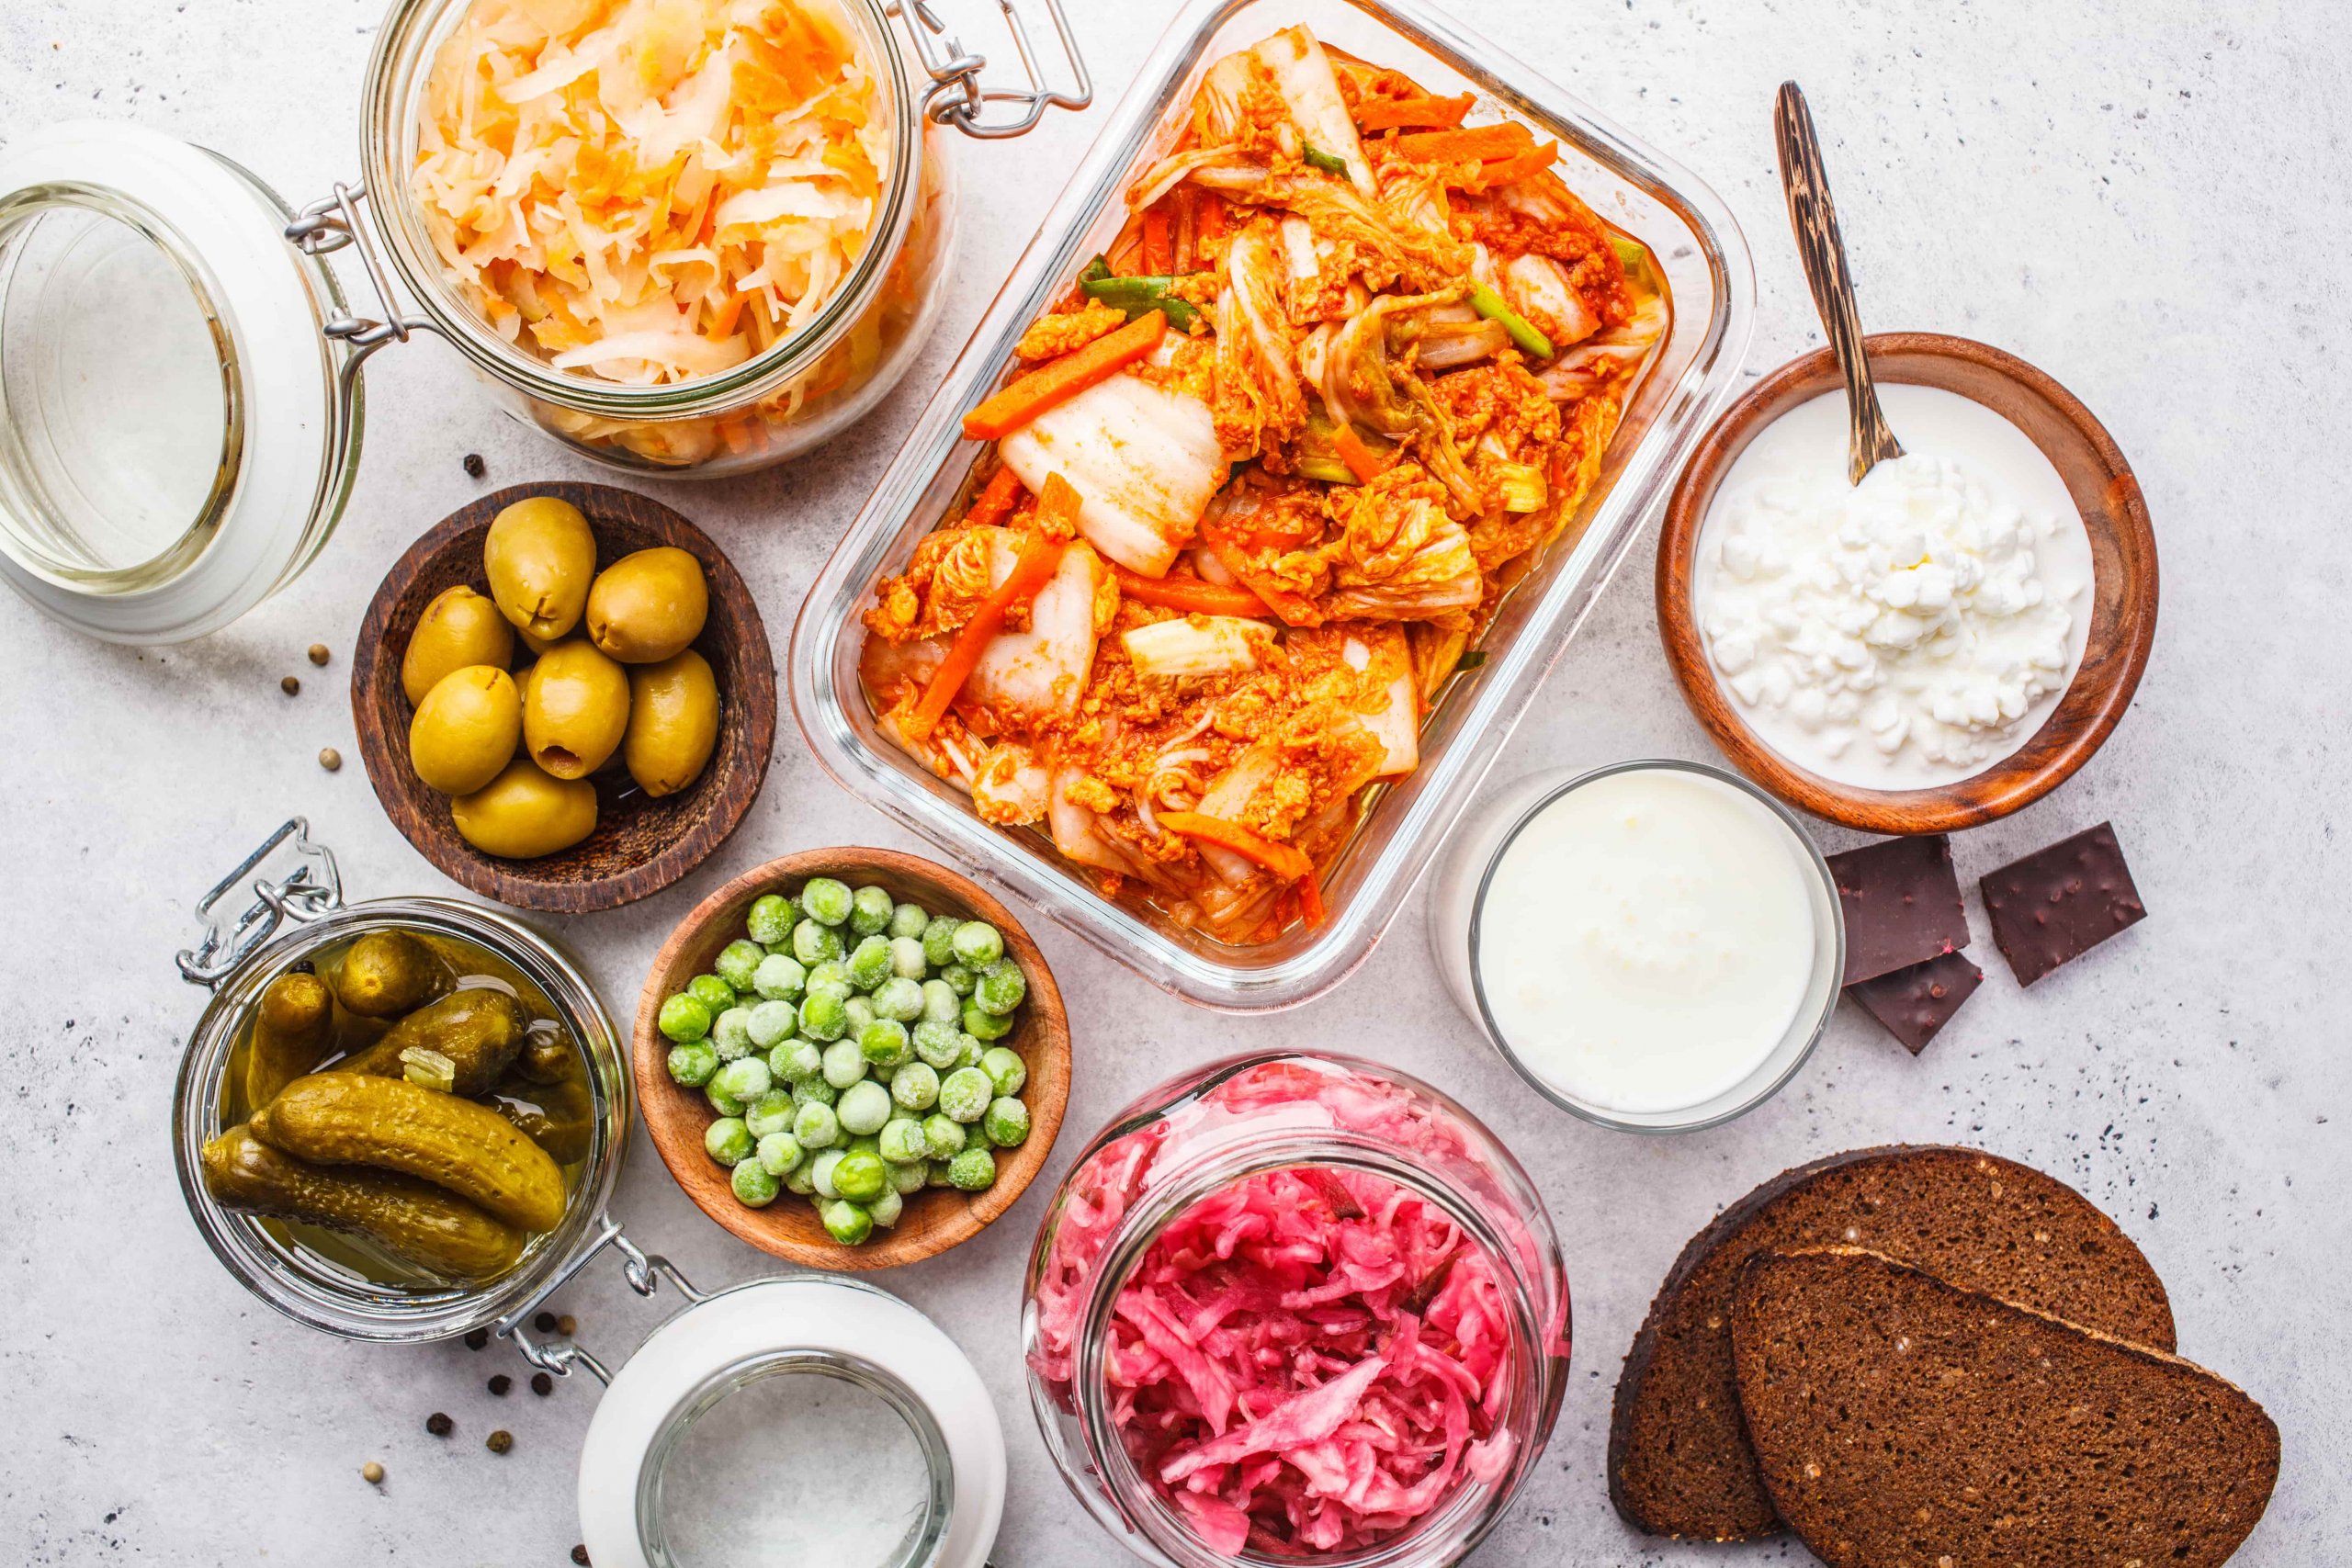 Fermented foods are great for gut health